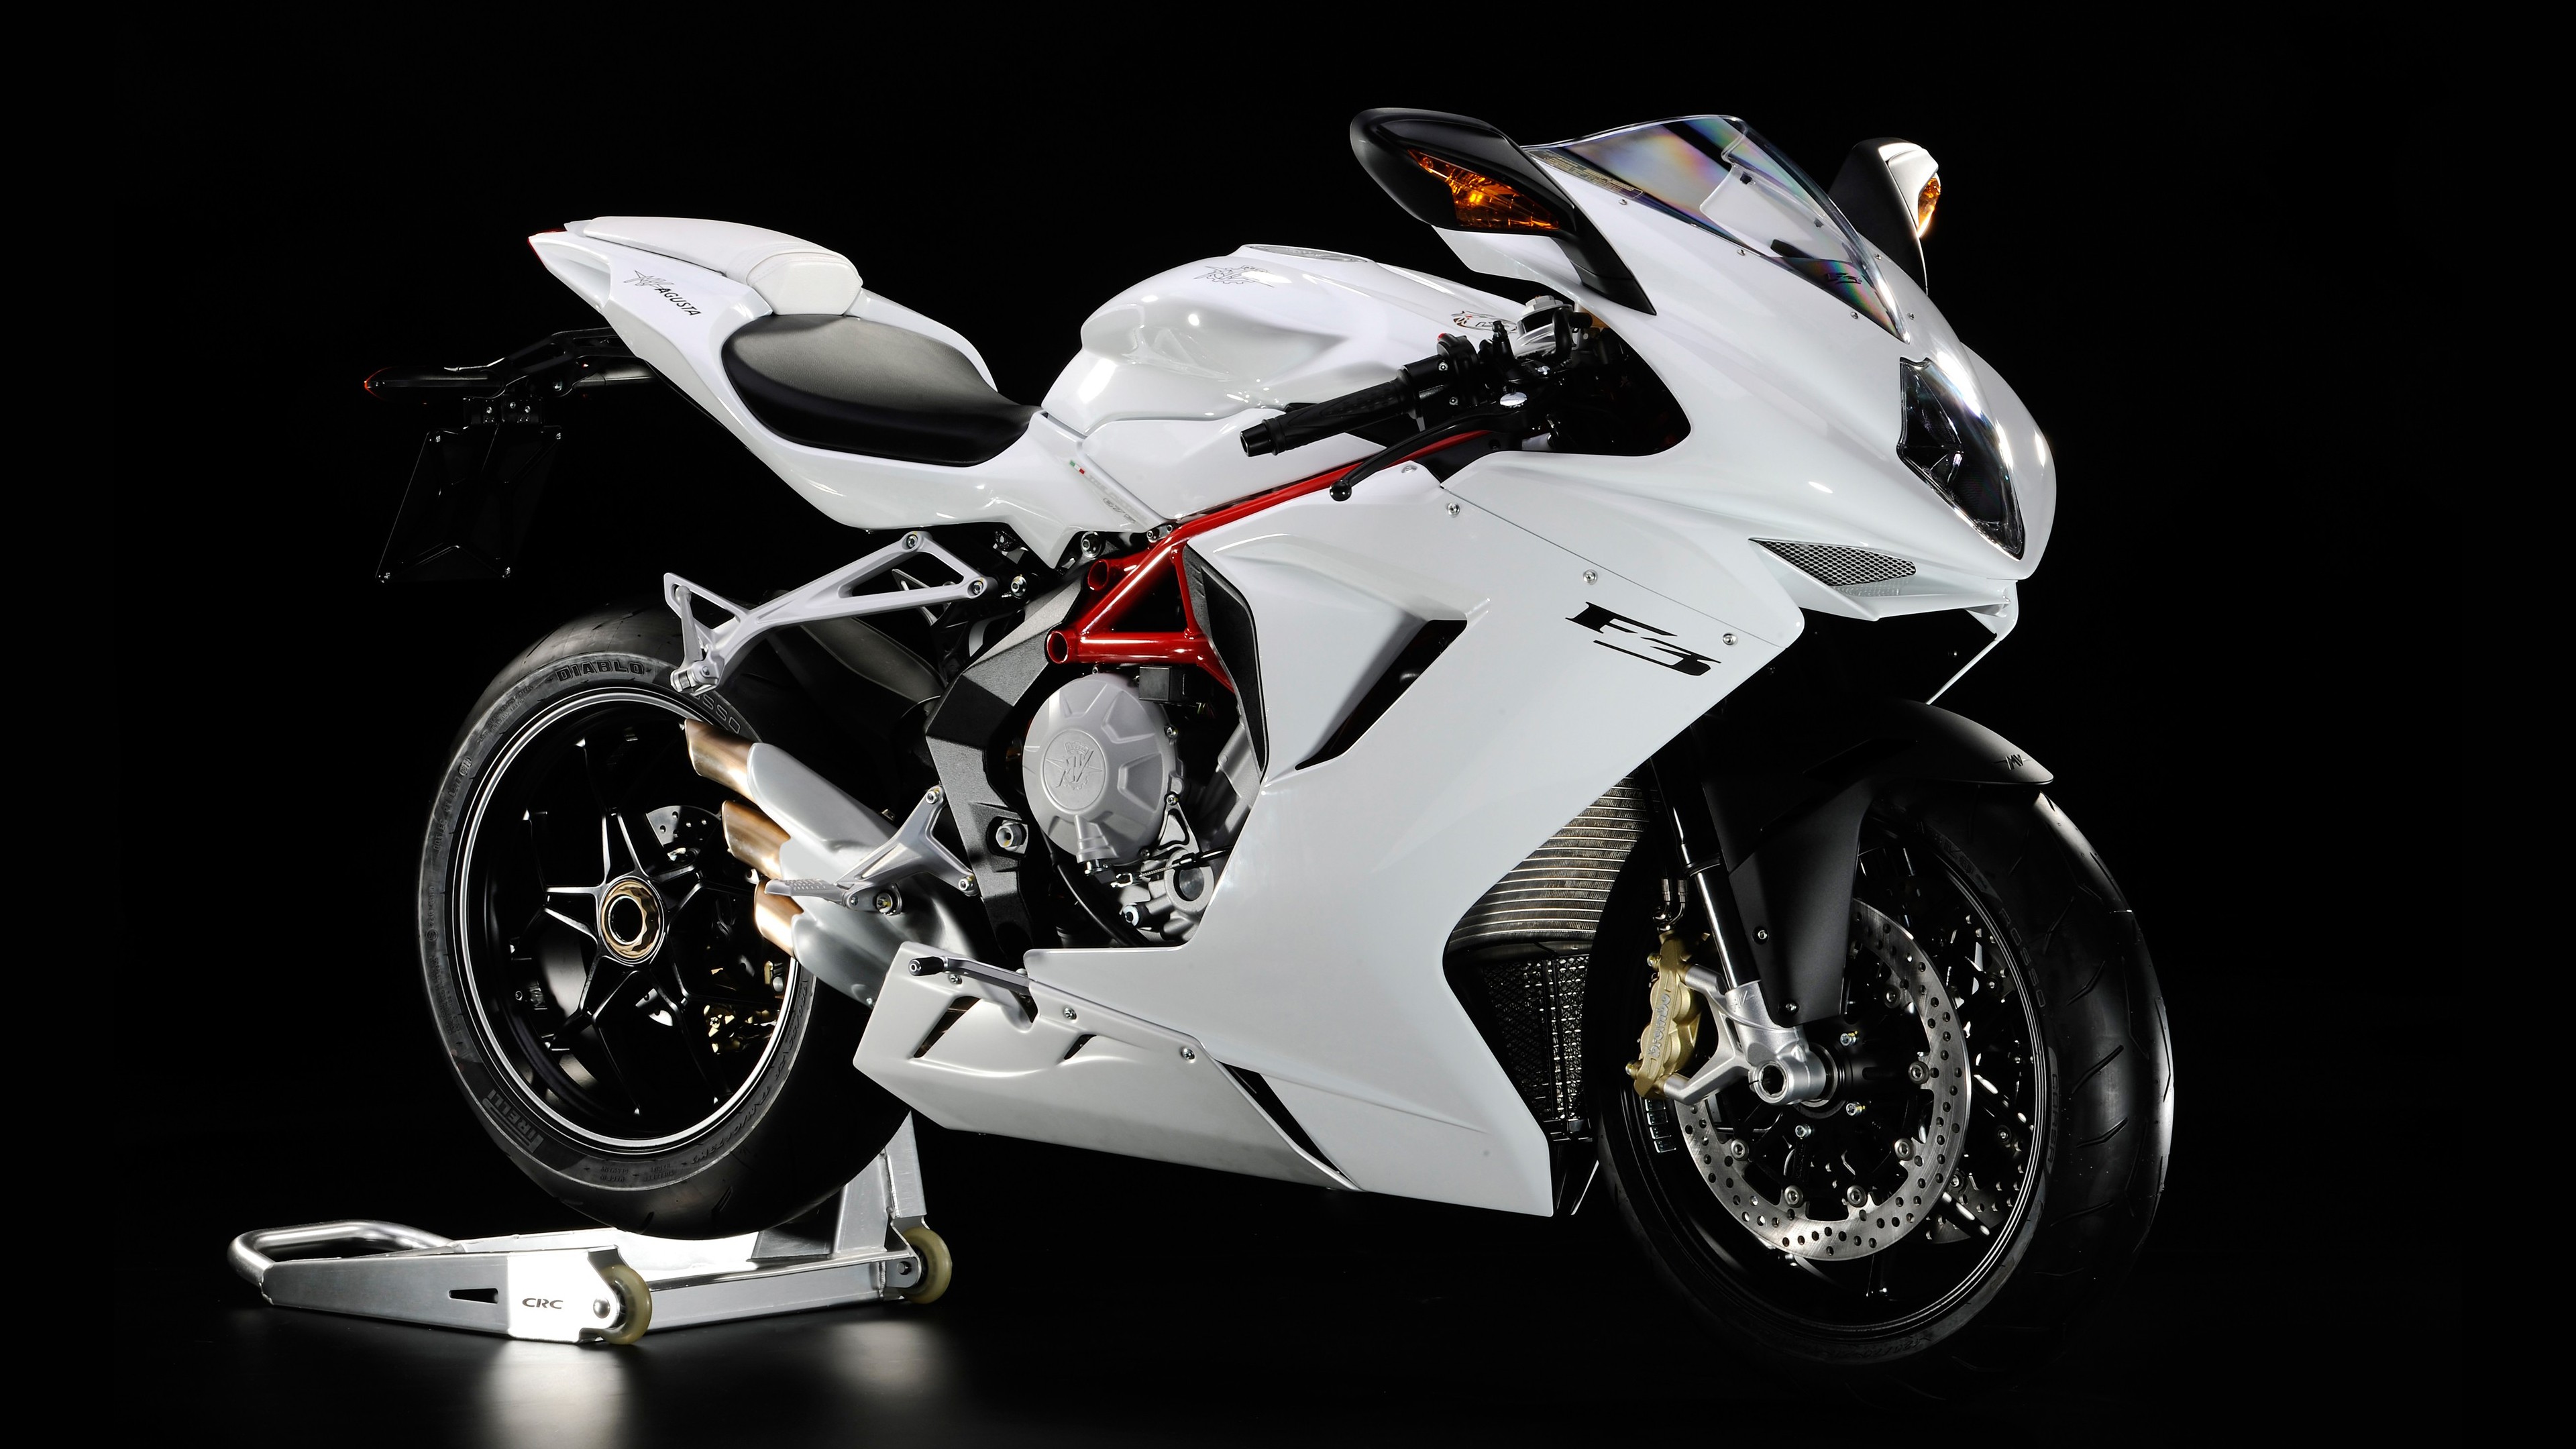 Mv agusta hd bikes k wallpapers images backgrounds photos and pictures